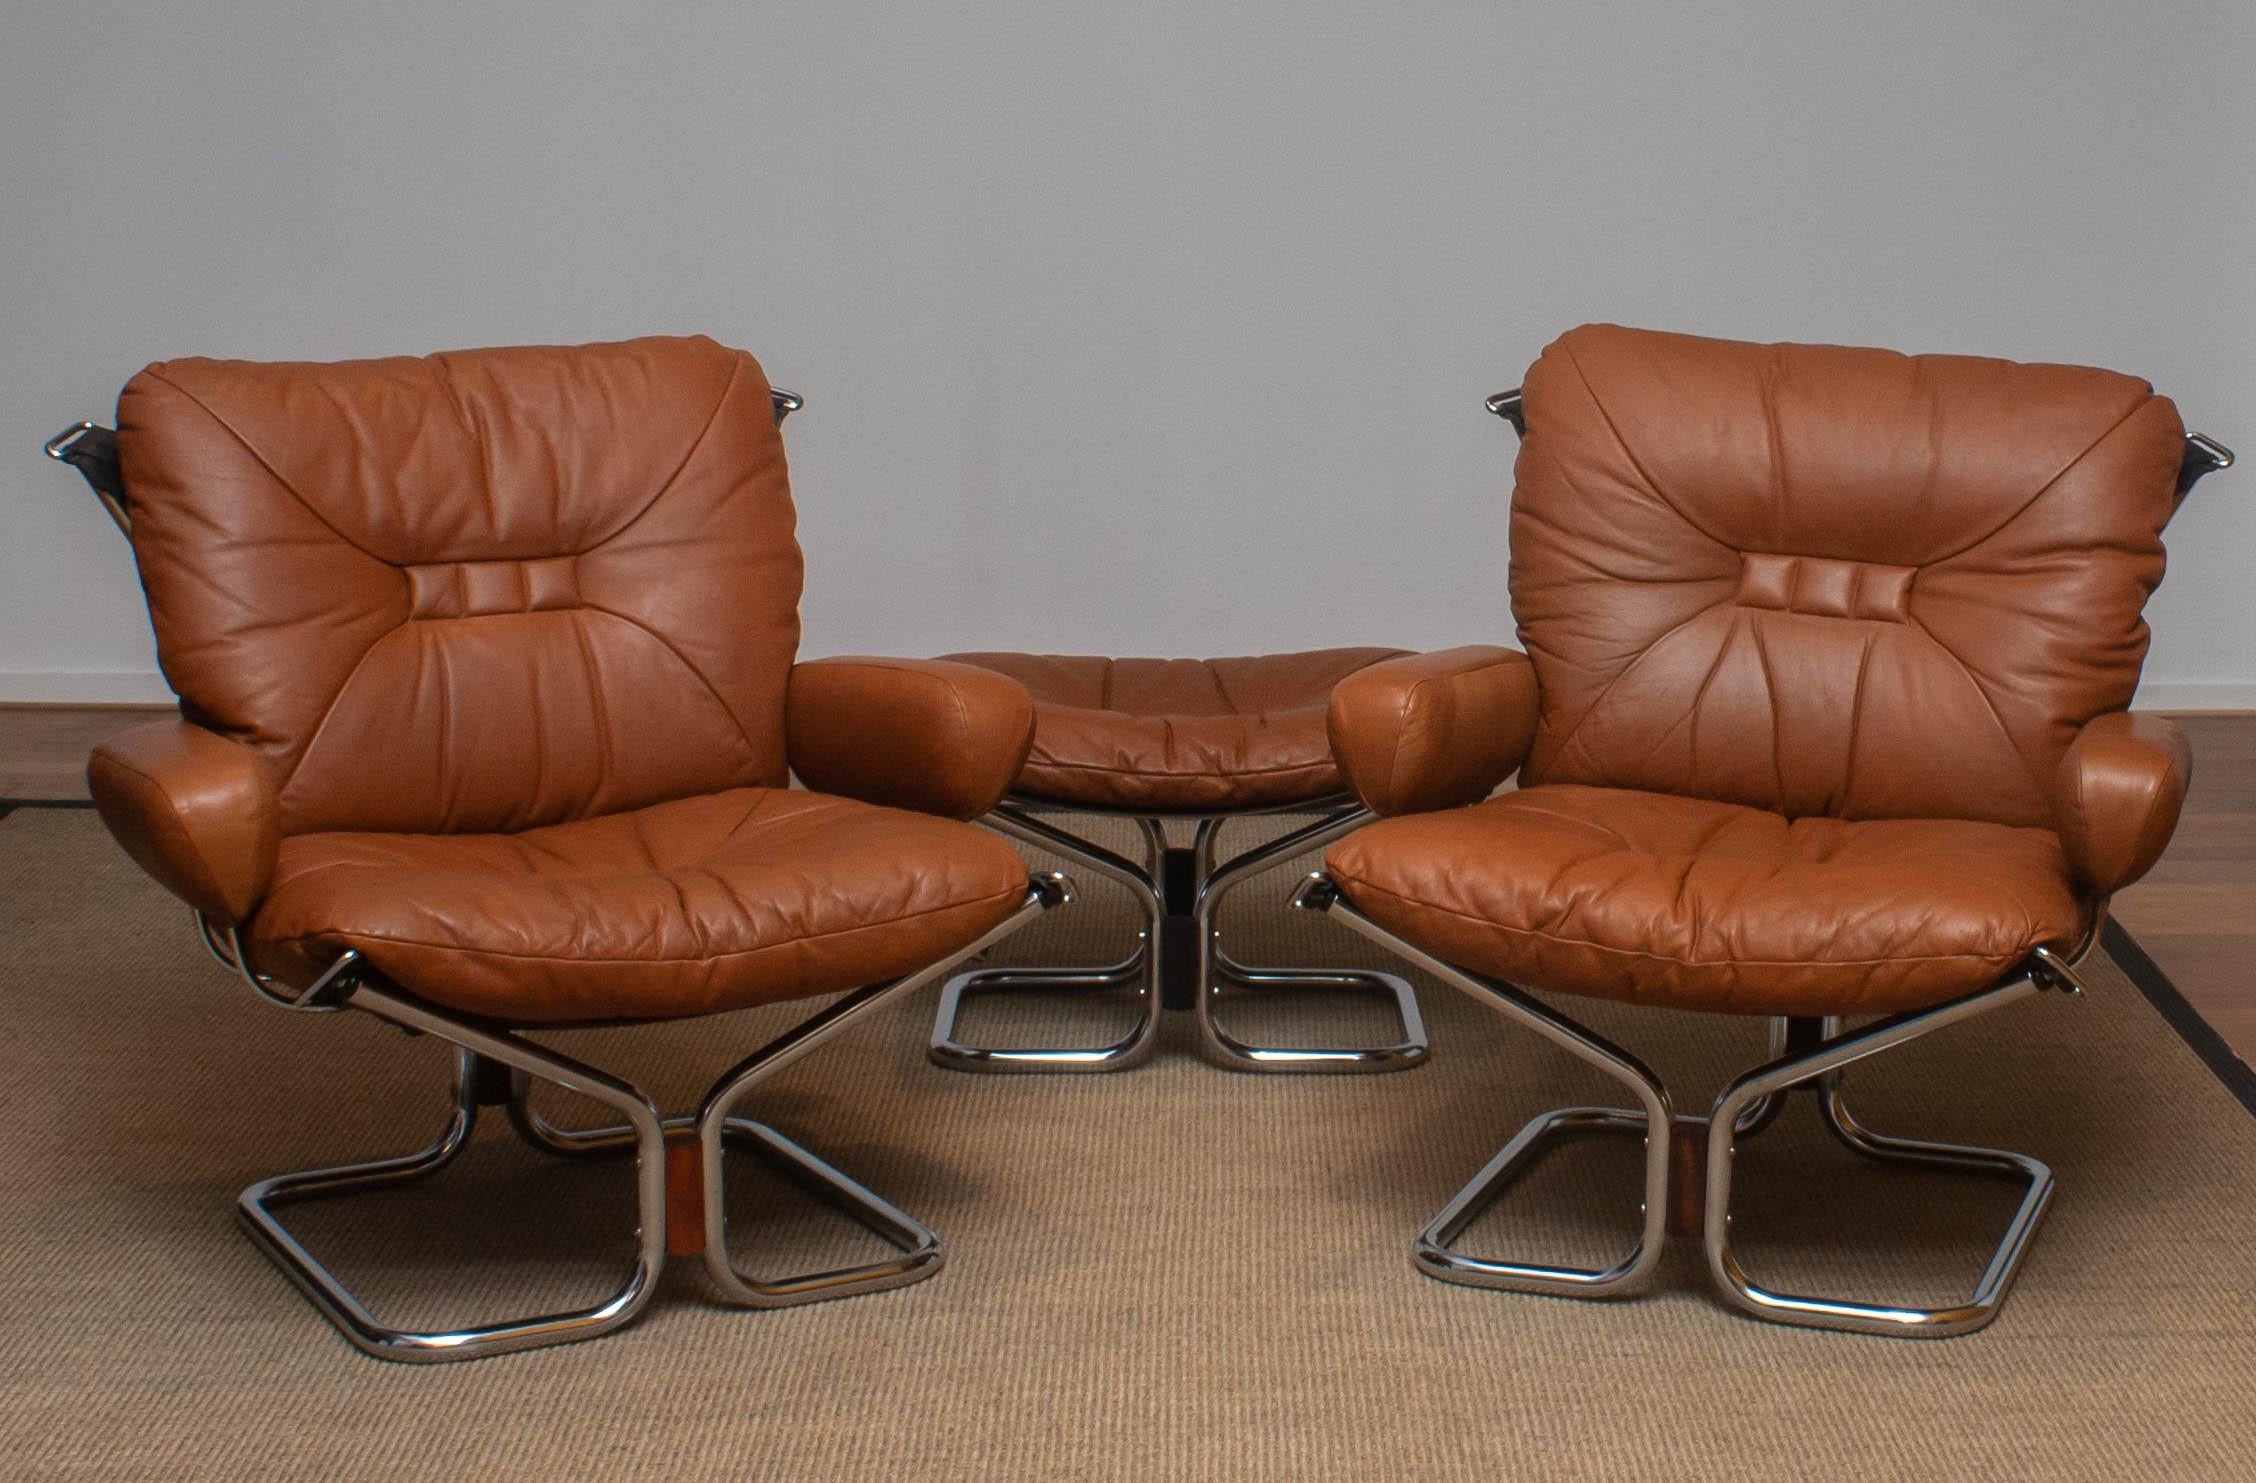 1970s Lounge Set Cognac Leather and Steel by Harald Relling for Westnofa, Norway 1